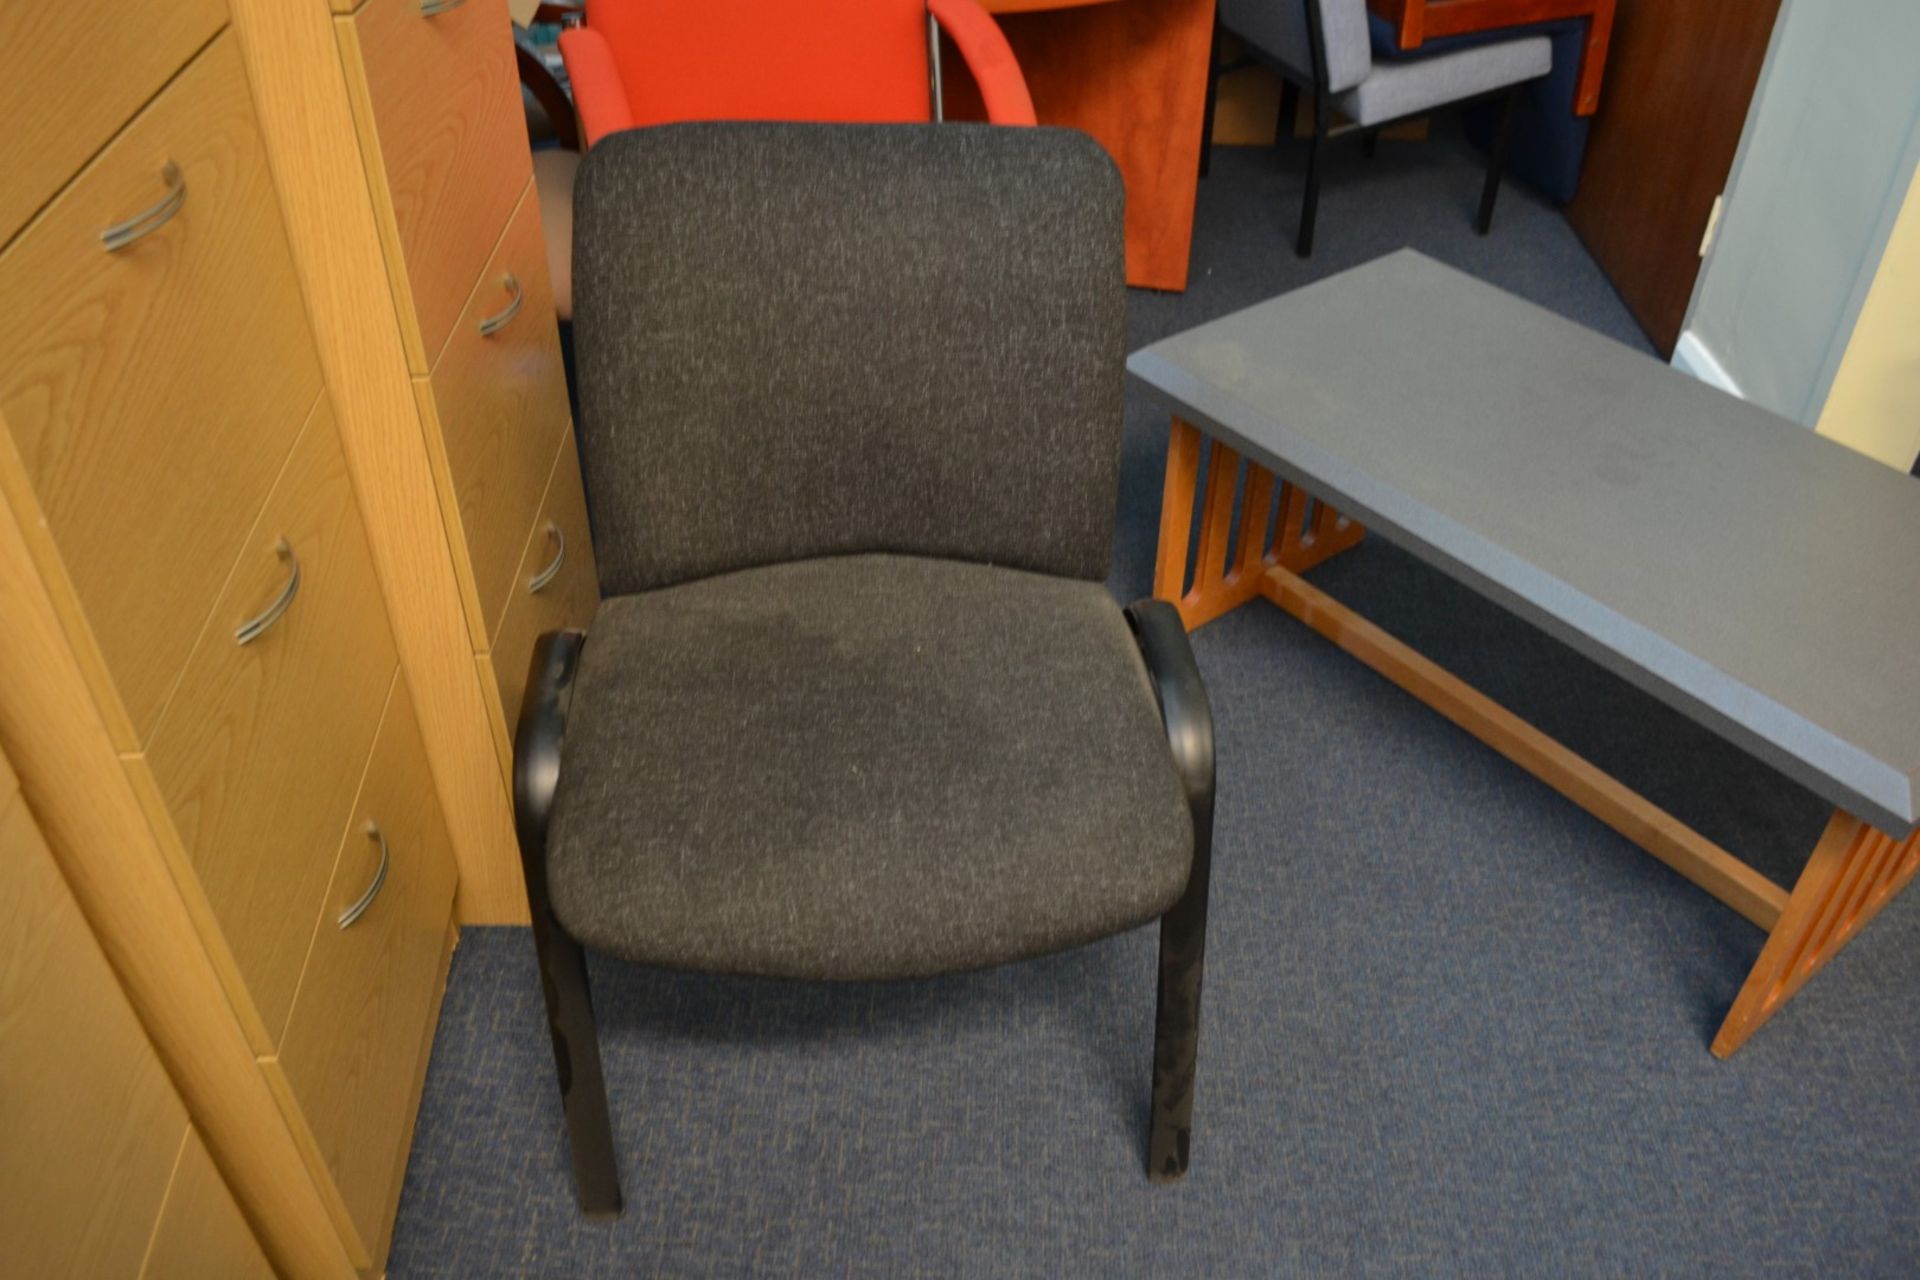 1 x Lot Of Various Office Chairs - Ref: VM559, 562, 563, 564/A16 B1 - CL409 - Location: Wakefield - Image 4 of 12